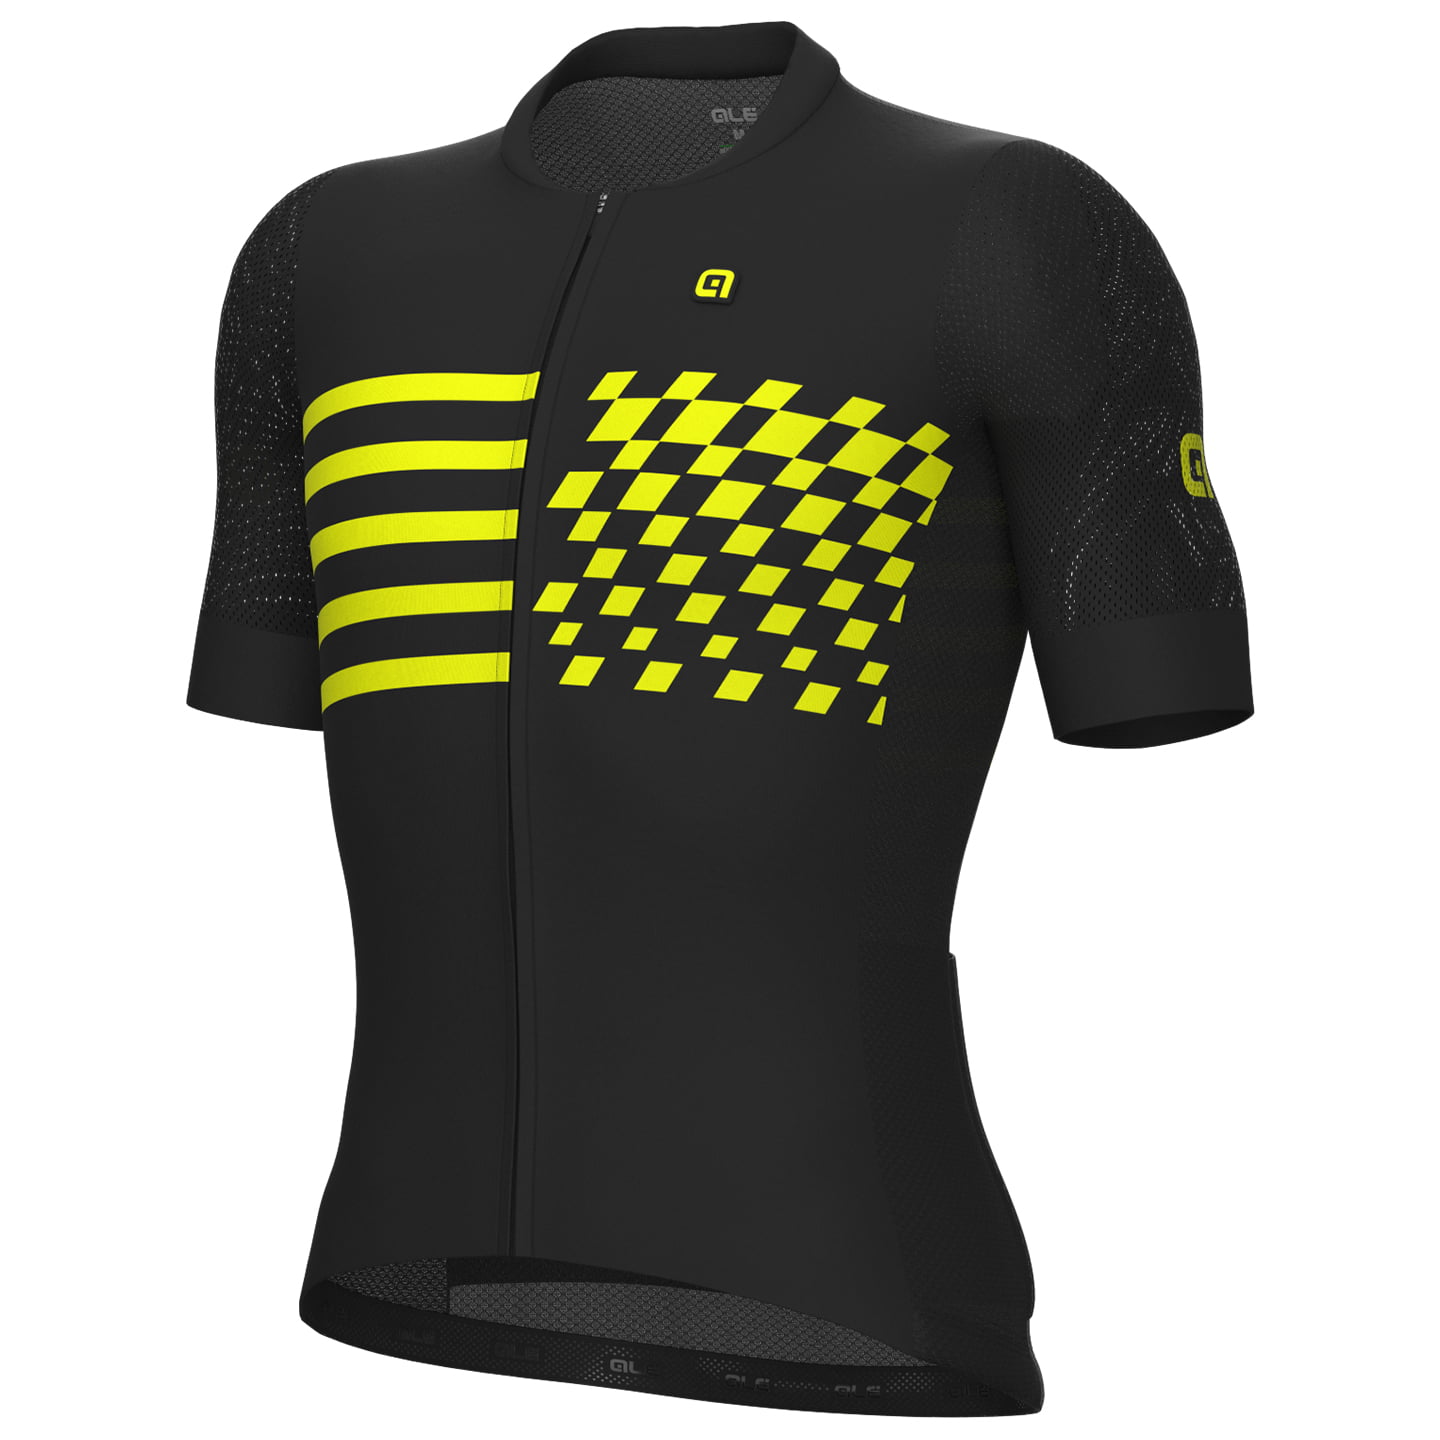 ALE Play Short Sleeve Jersey, for men, size S, Cycling jersey, Cycling clothing